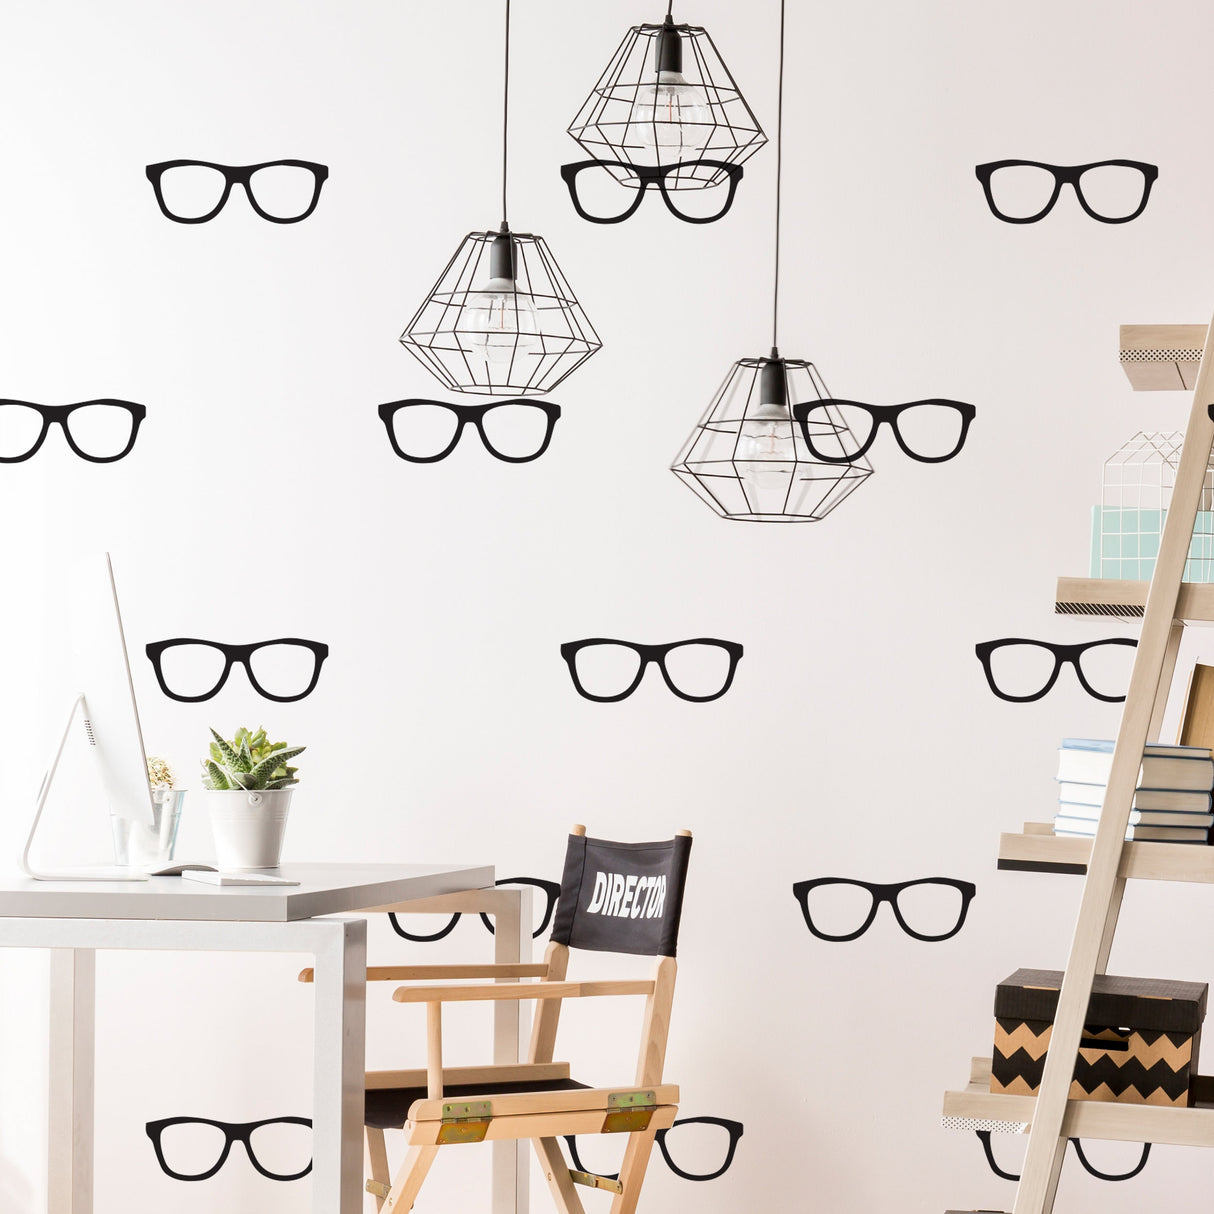 50x Glasses Wall Decals Decor - Spectacles Sticker For Bedroom Living Room